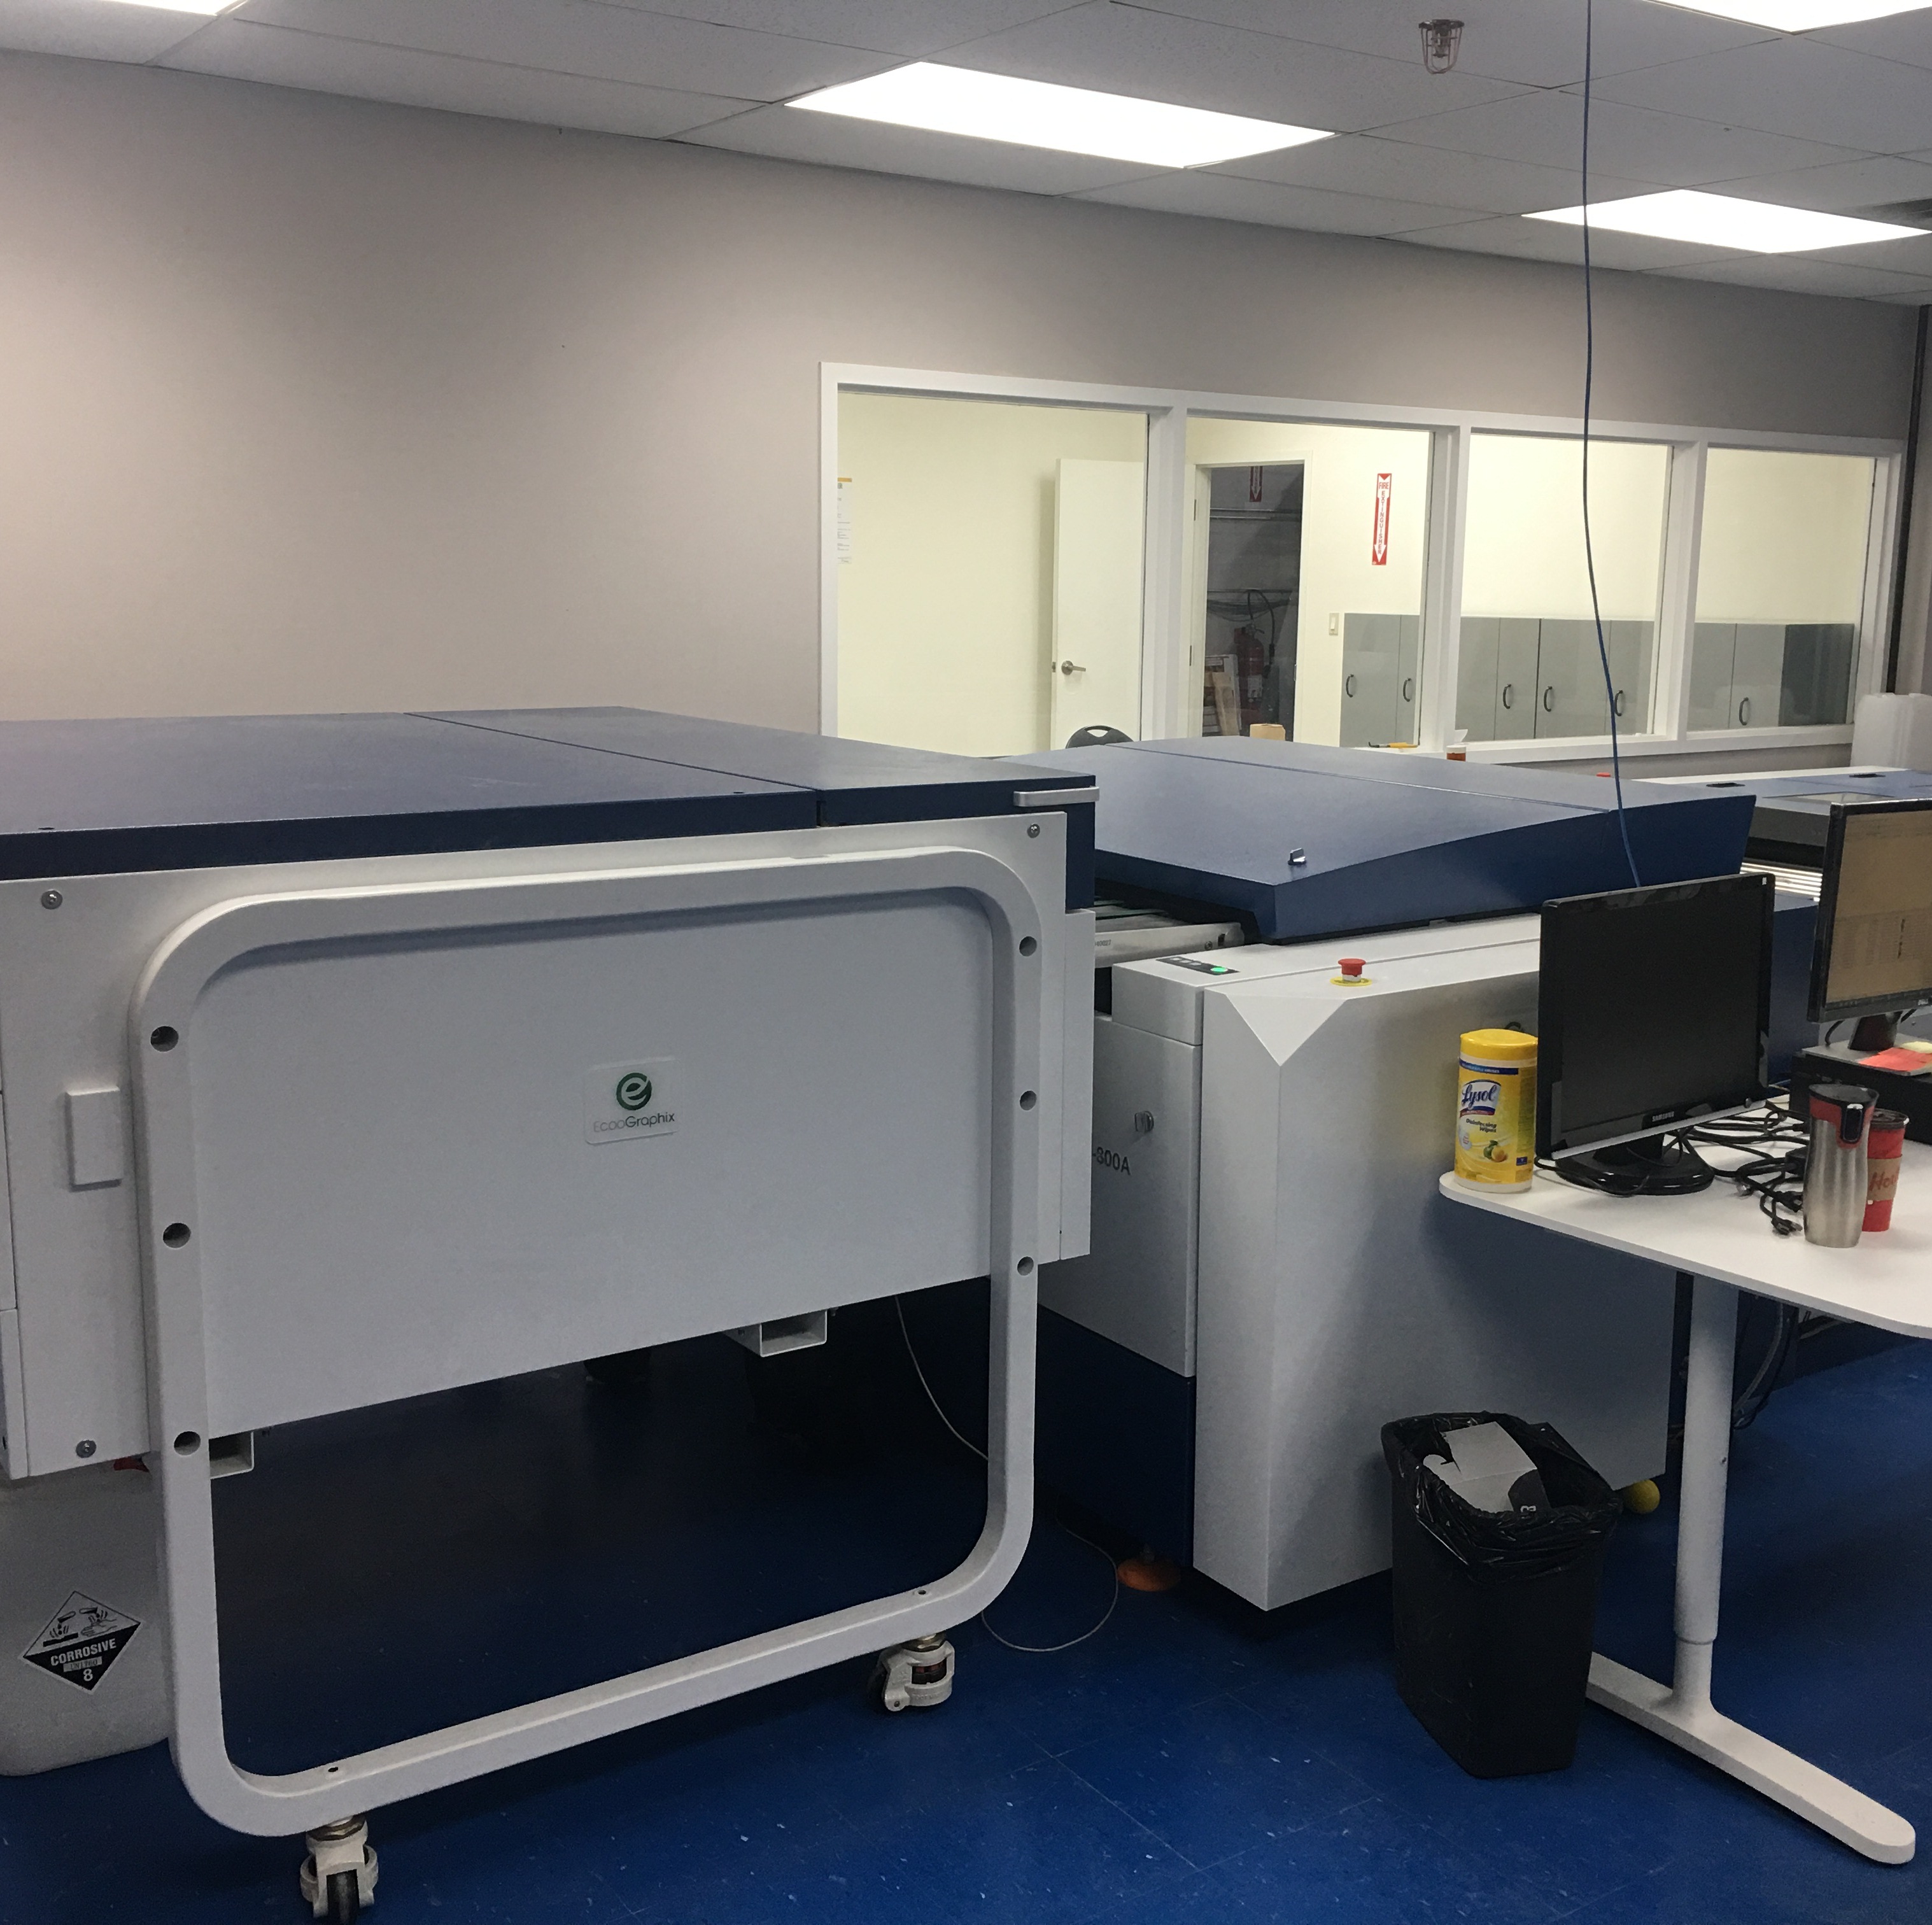 SooPak in Canada installed Ecoo-Setter T-800FA and Ecoo plates